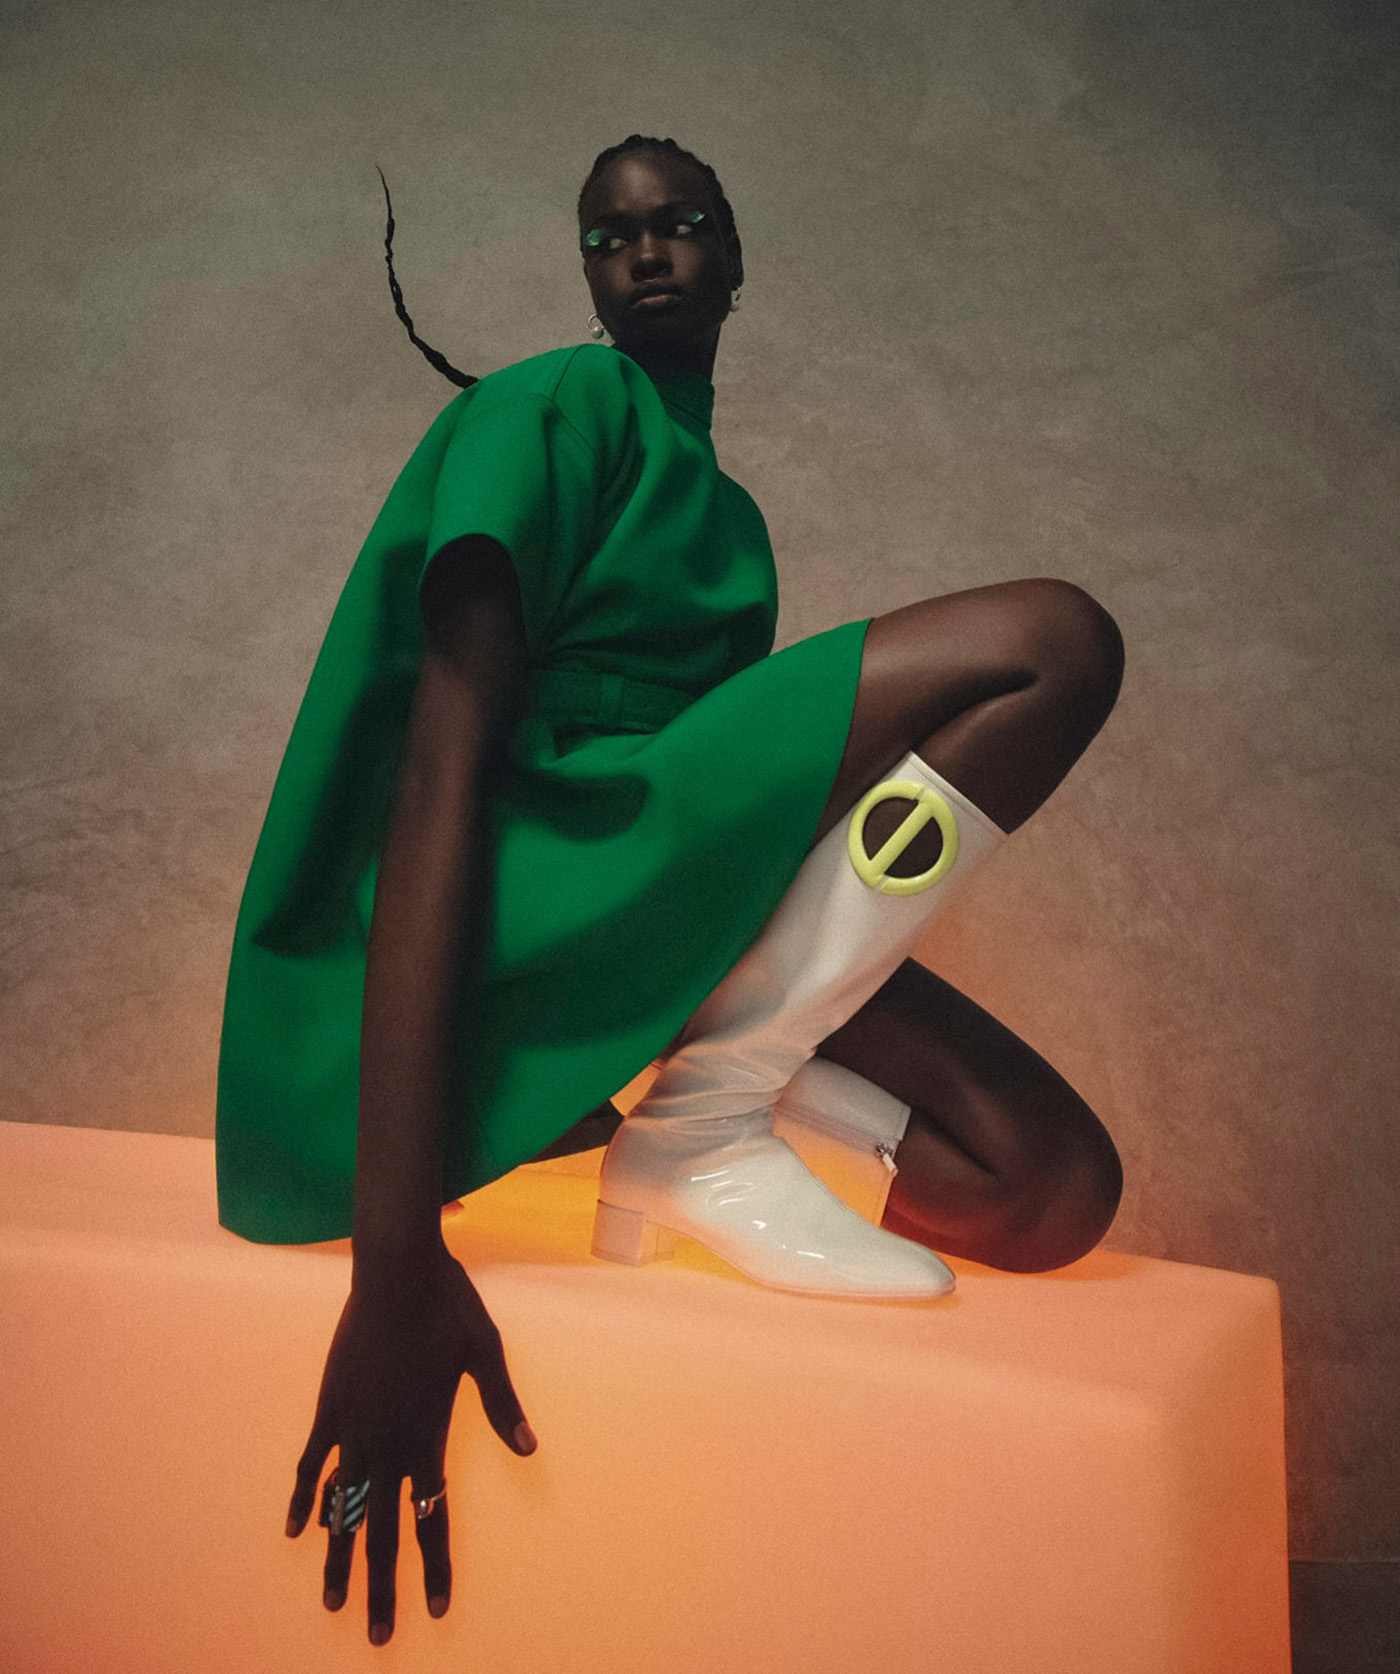 Bakhita Lual in Dior on Vogue Australia February 2022 by Isaac Brown